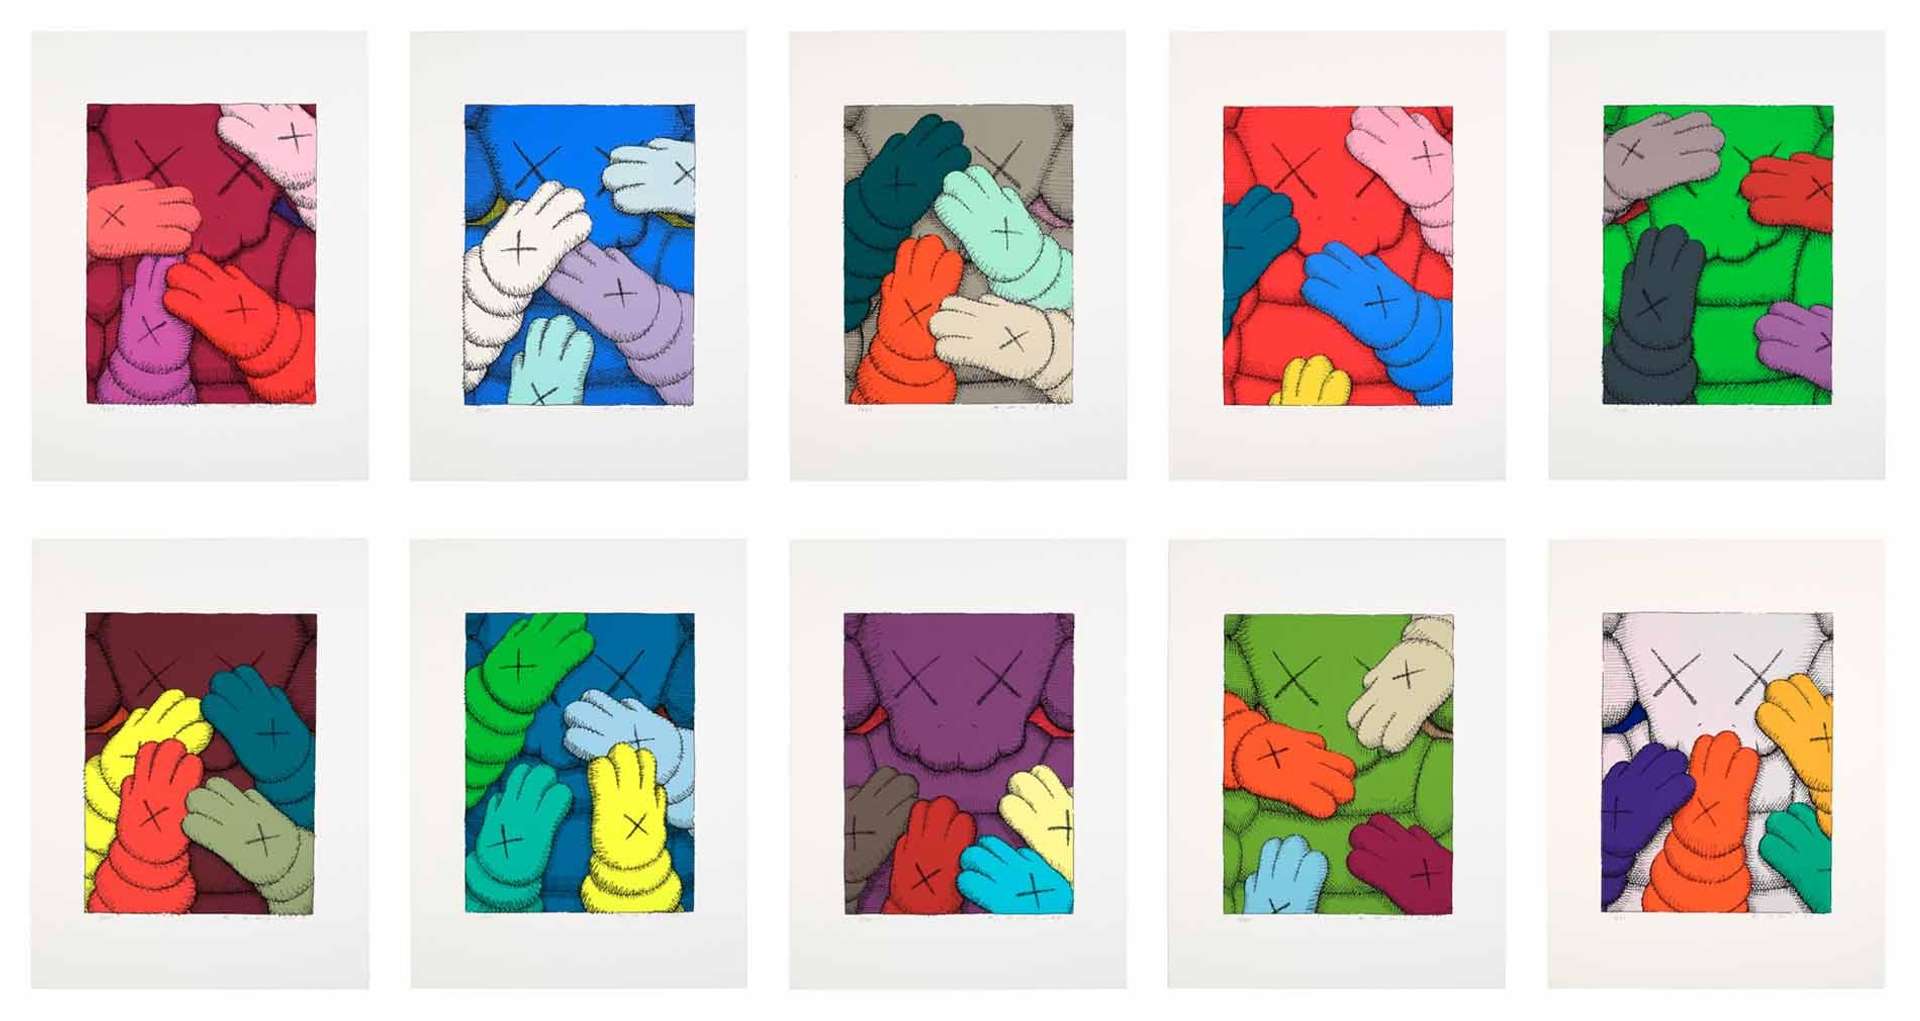 Each print in the collection depicts KAWS’ much loved cartoon character,Companion. Characterised by his inflated skull and crossbones head, crossed out eyes and Mickey Mouse-like body and gloved hands.